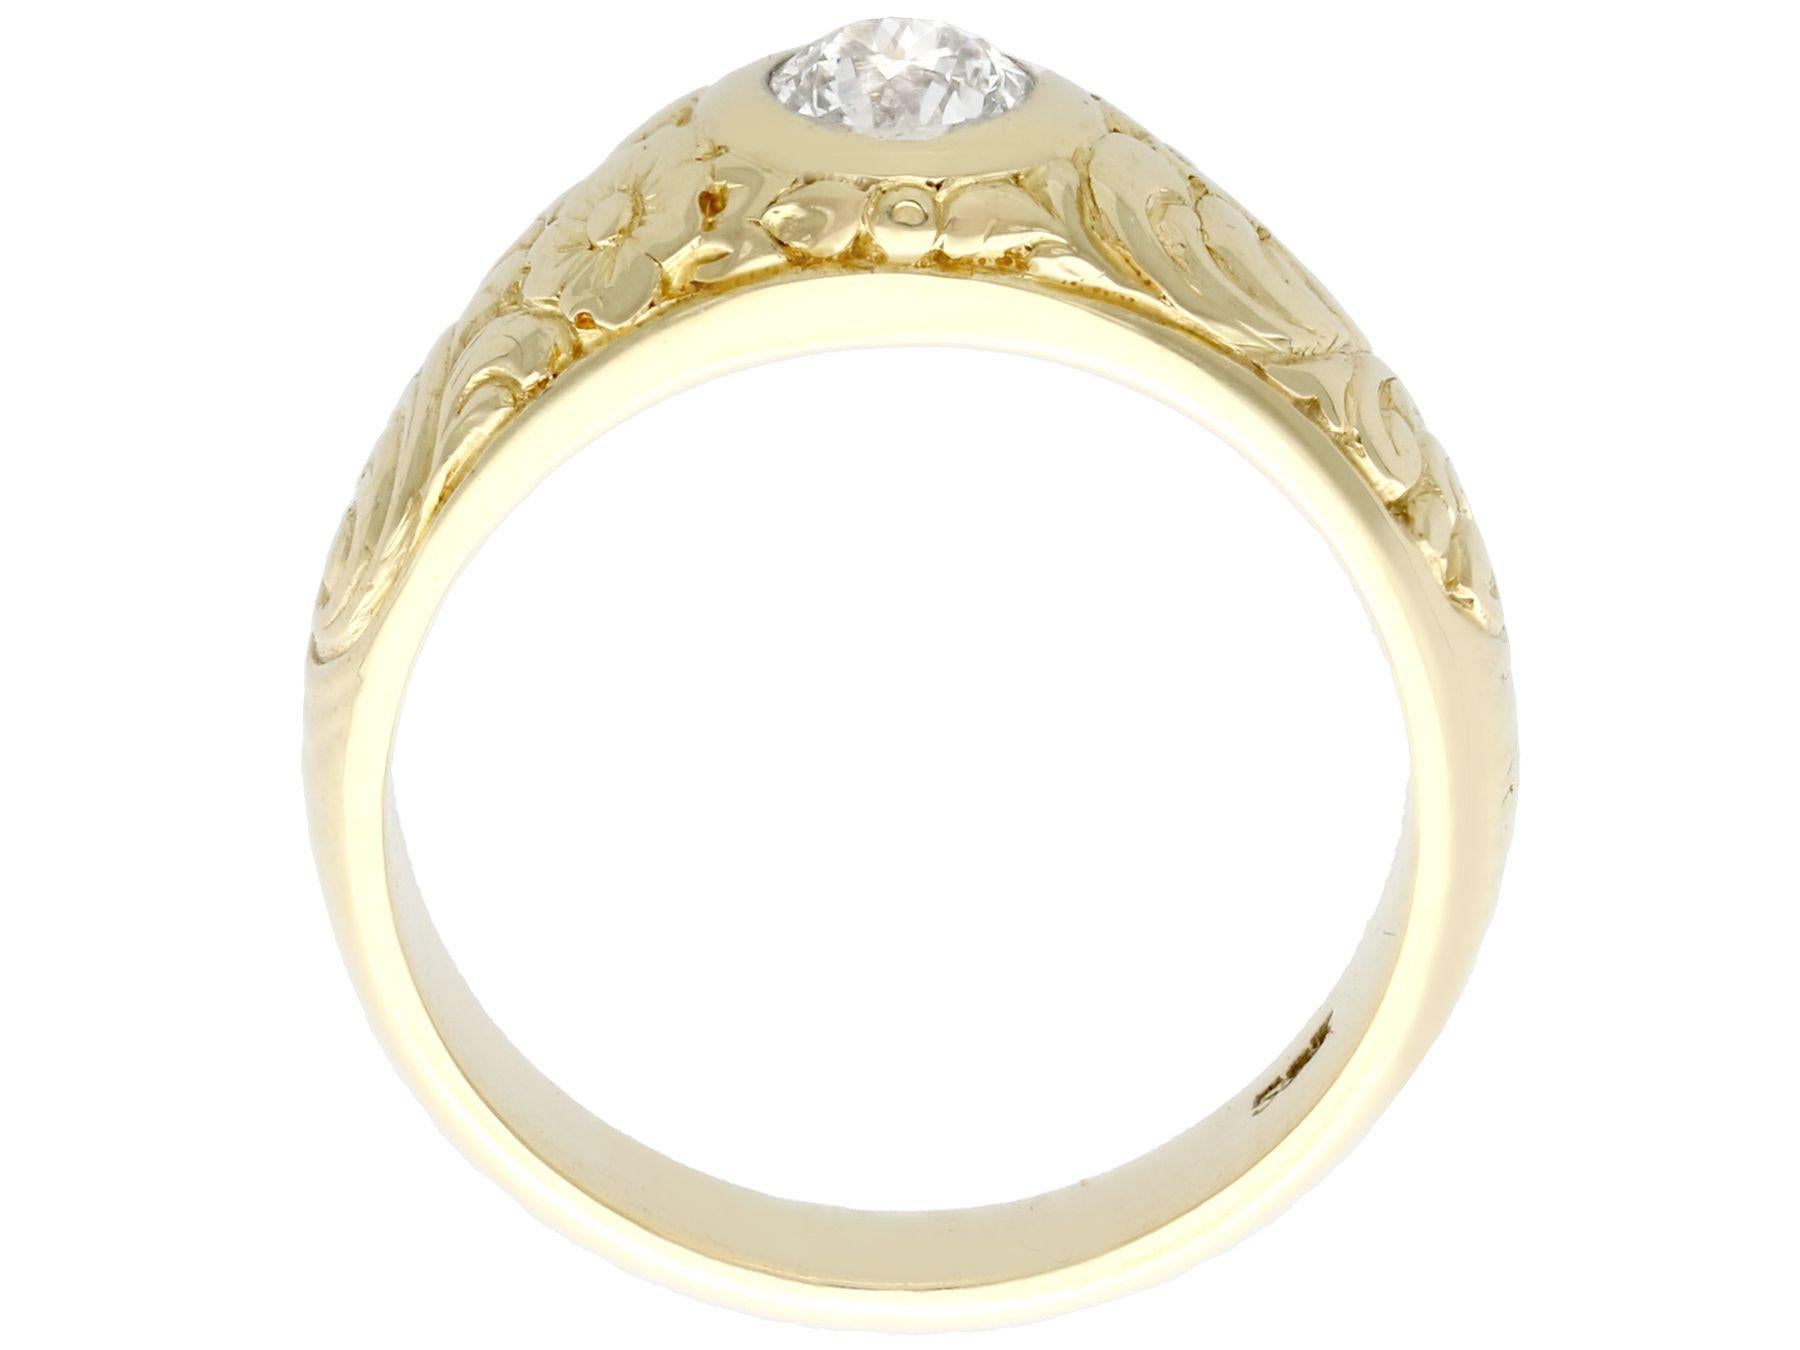 Women's or Men's Antique Diamond and Yellow Gold Solitaire Ring, Circa 1930